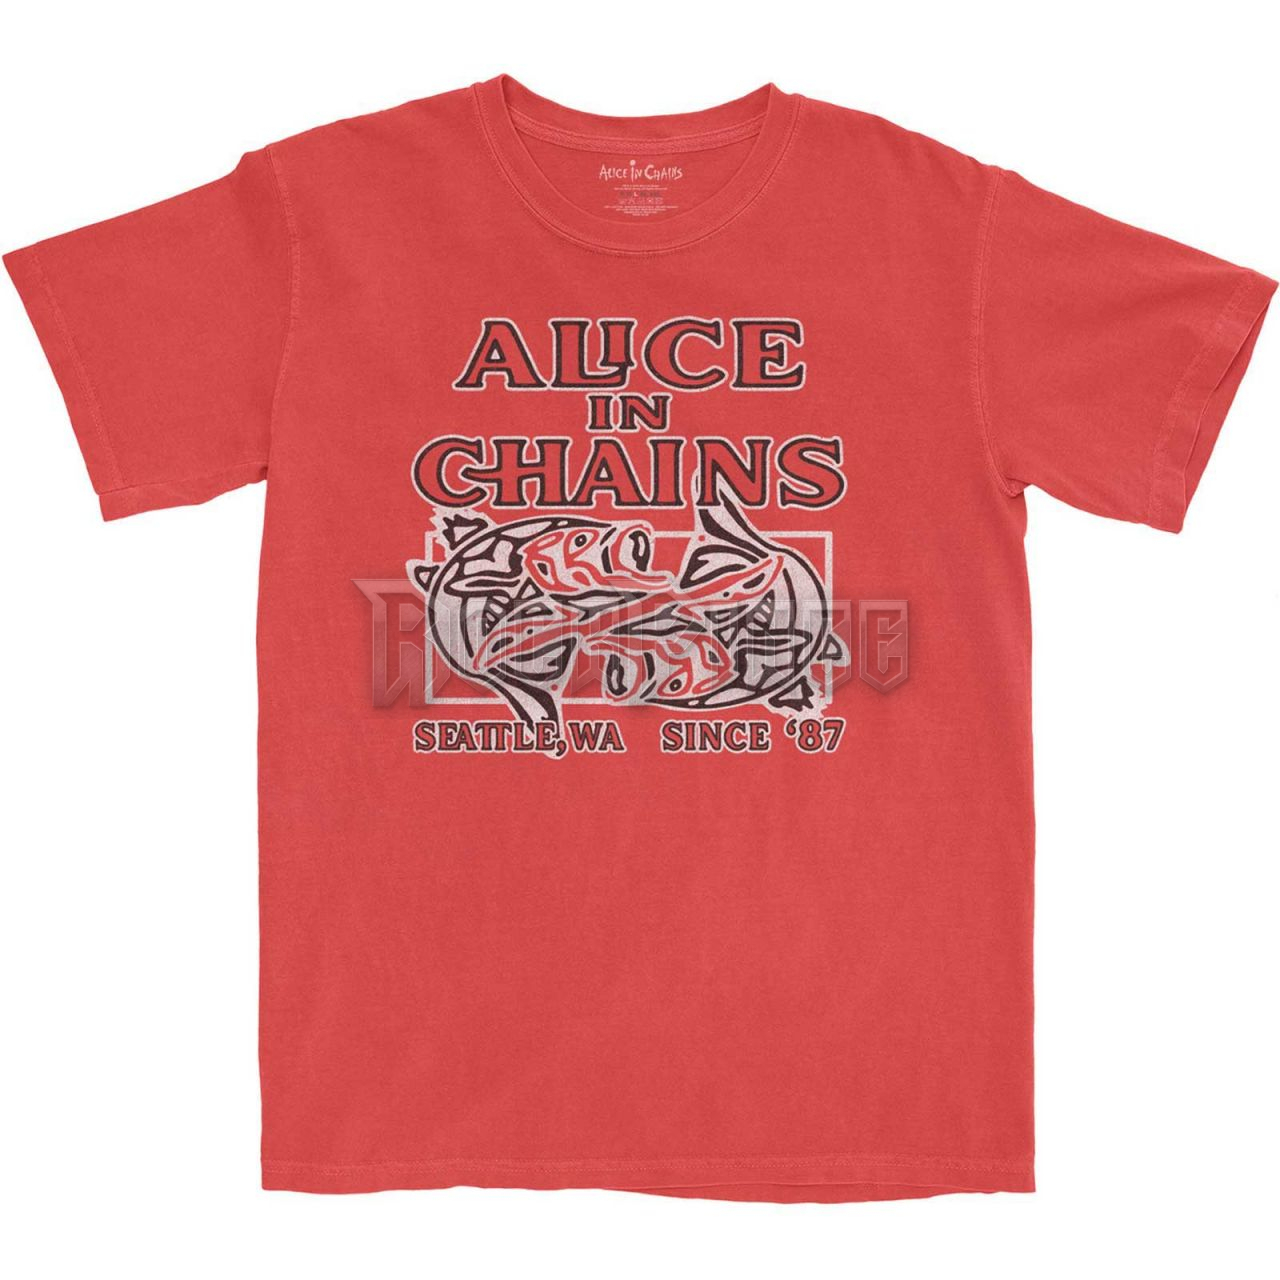 Alice In Chains - Totem Fish - unisex póló - AICTS17MP